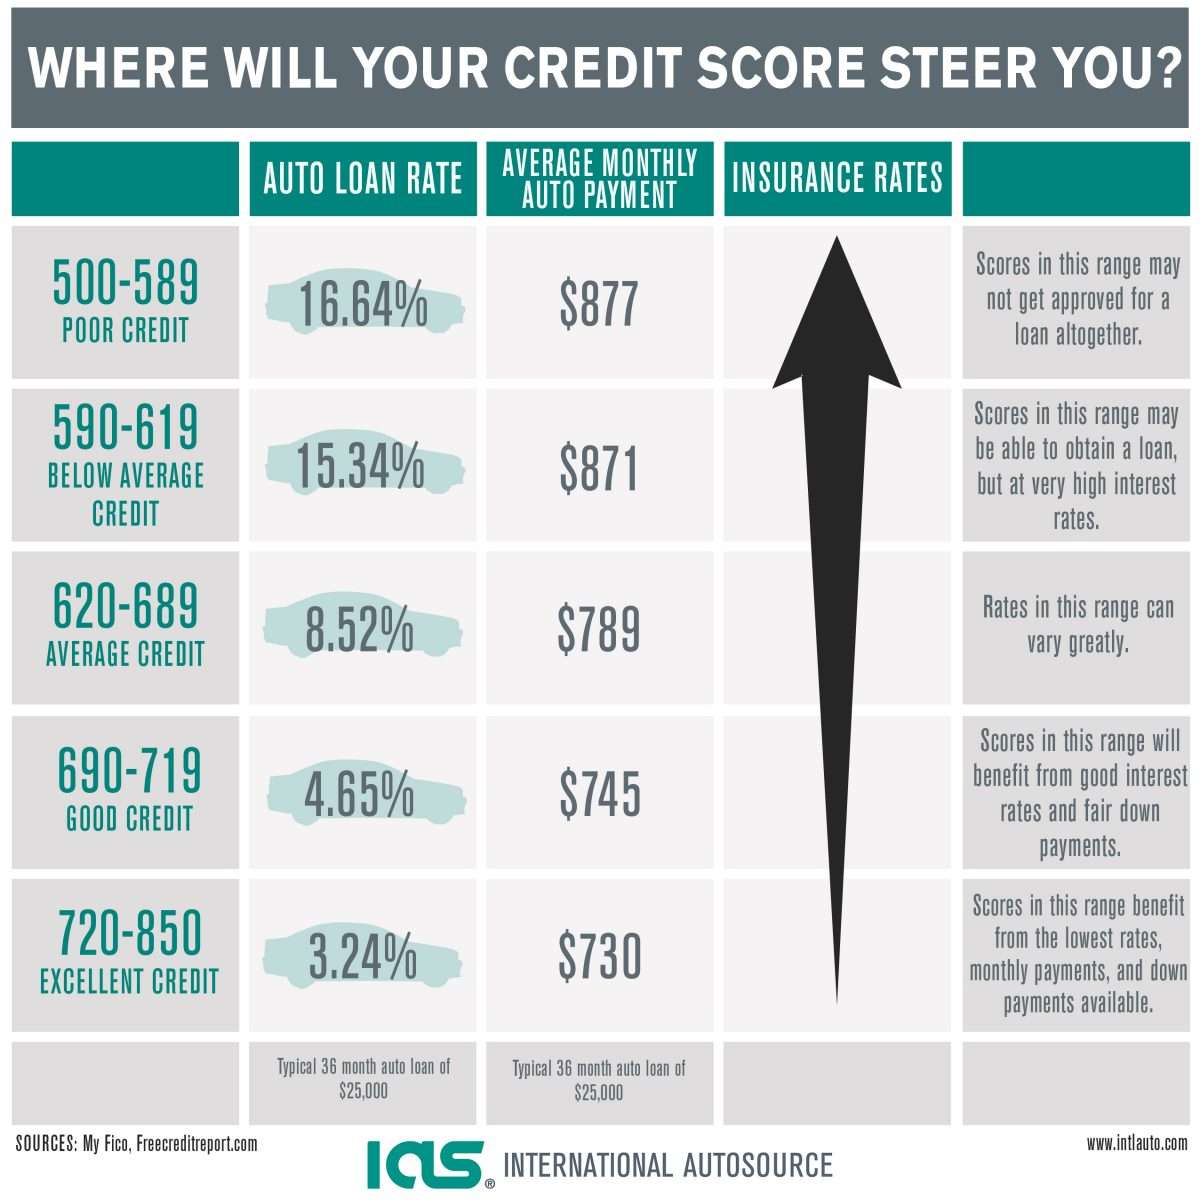 How a Bad Credit Score Affects Your Auto Loan Rate